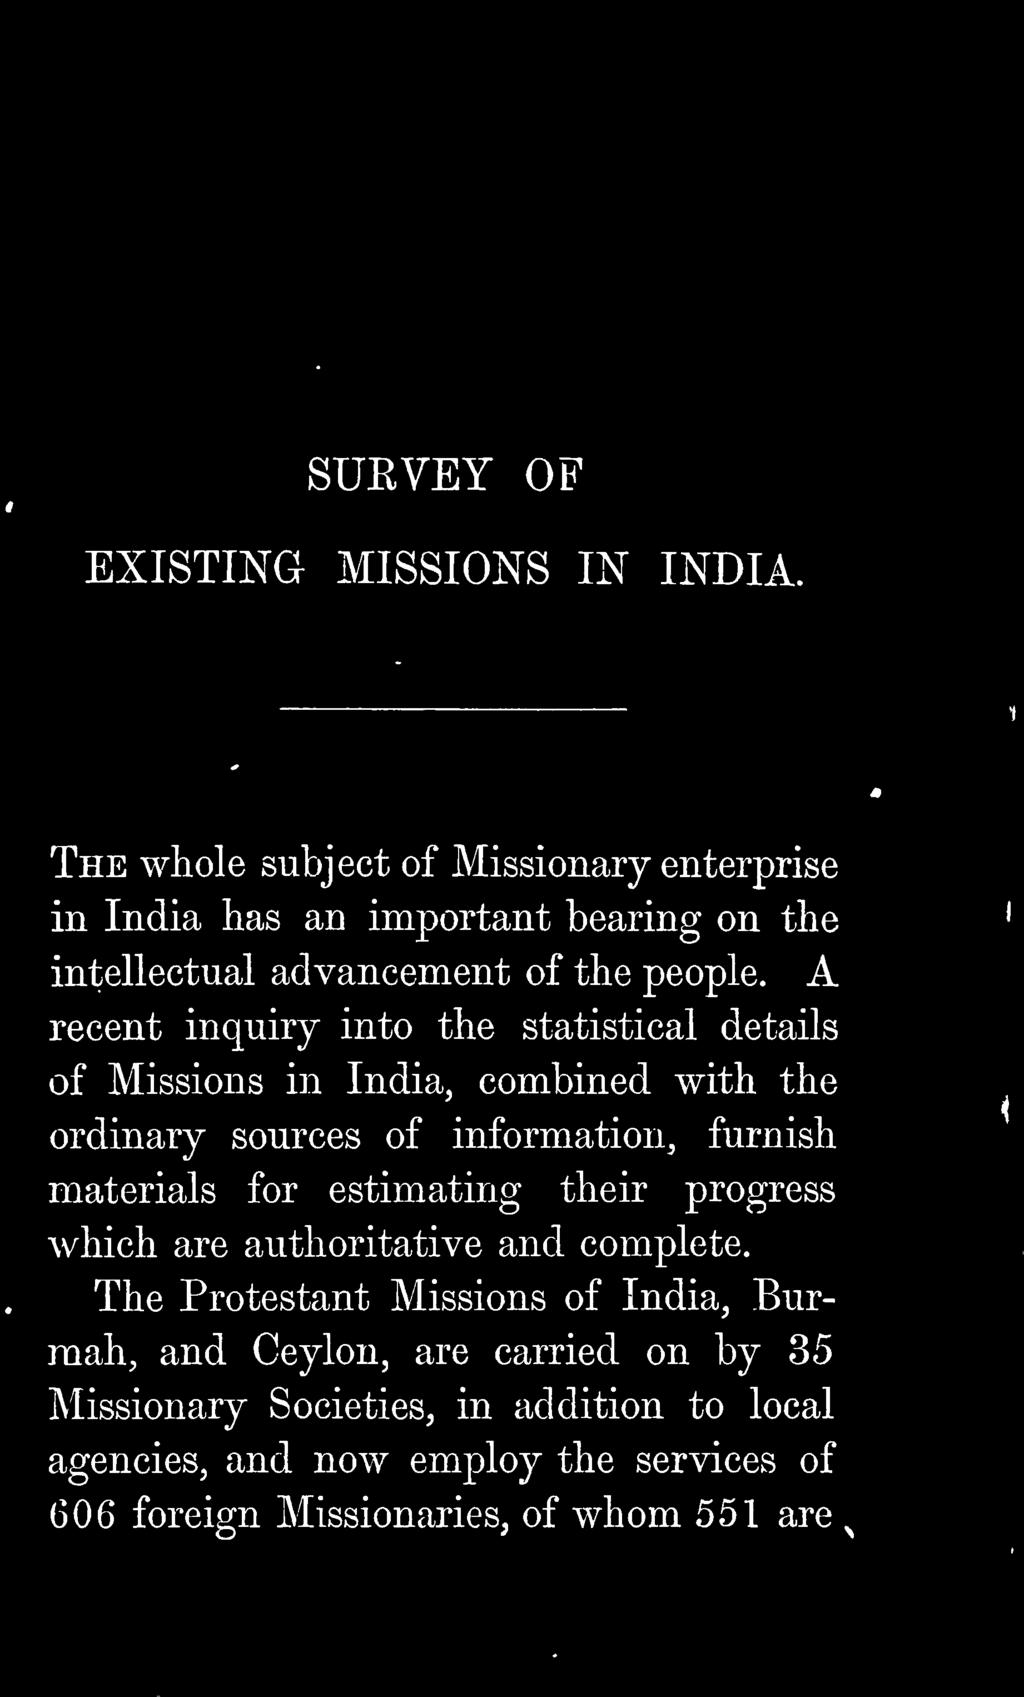 recent inquiry into the statistical details of Missions in India, combined with the ordinary sources of information, furnish materials for